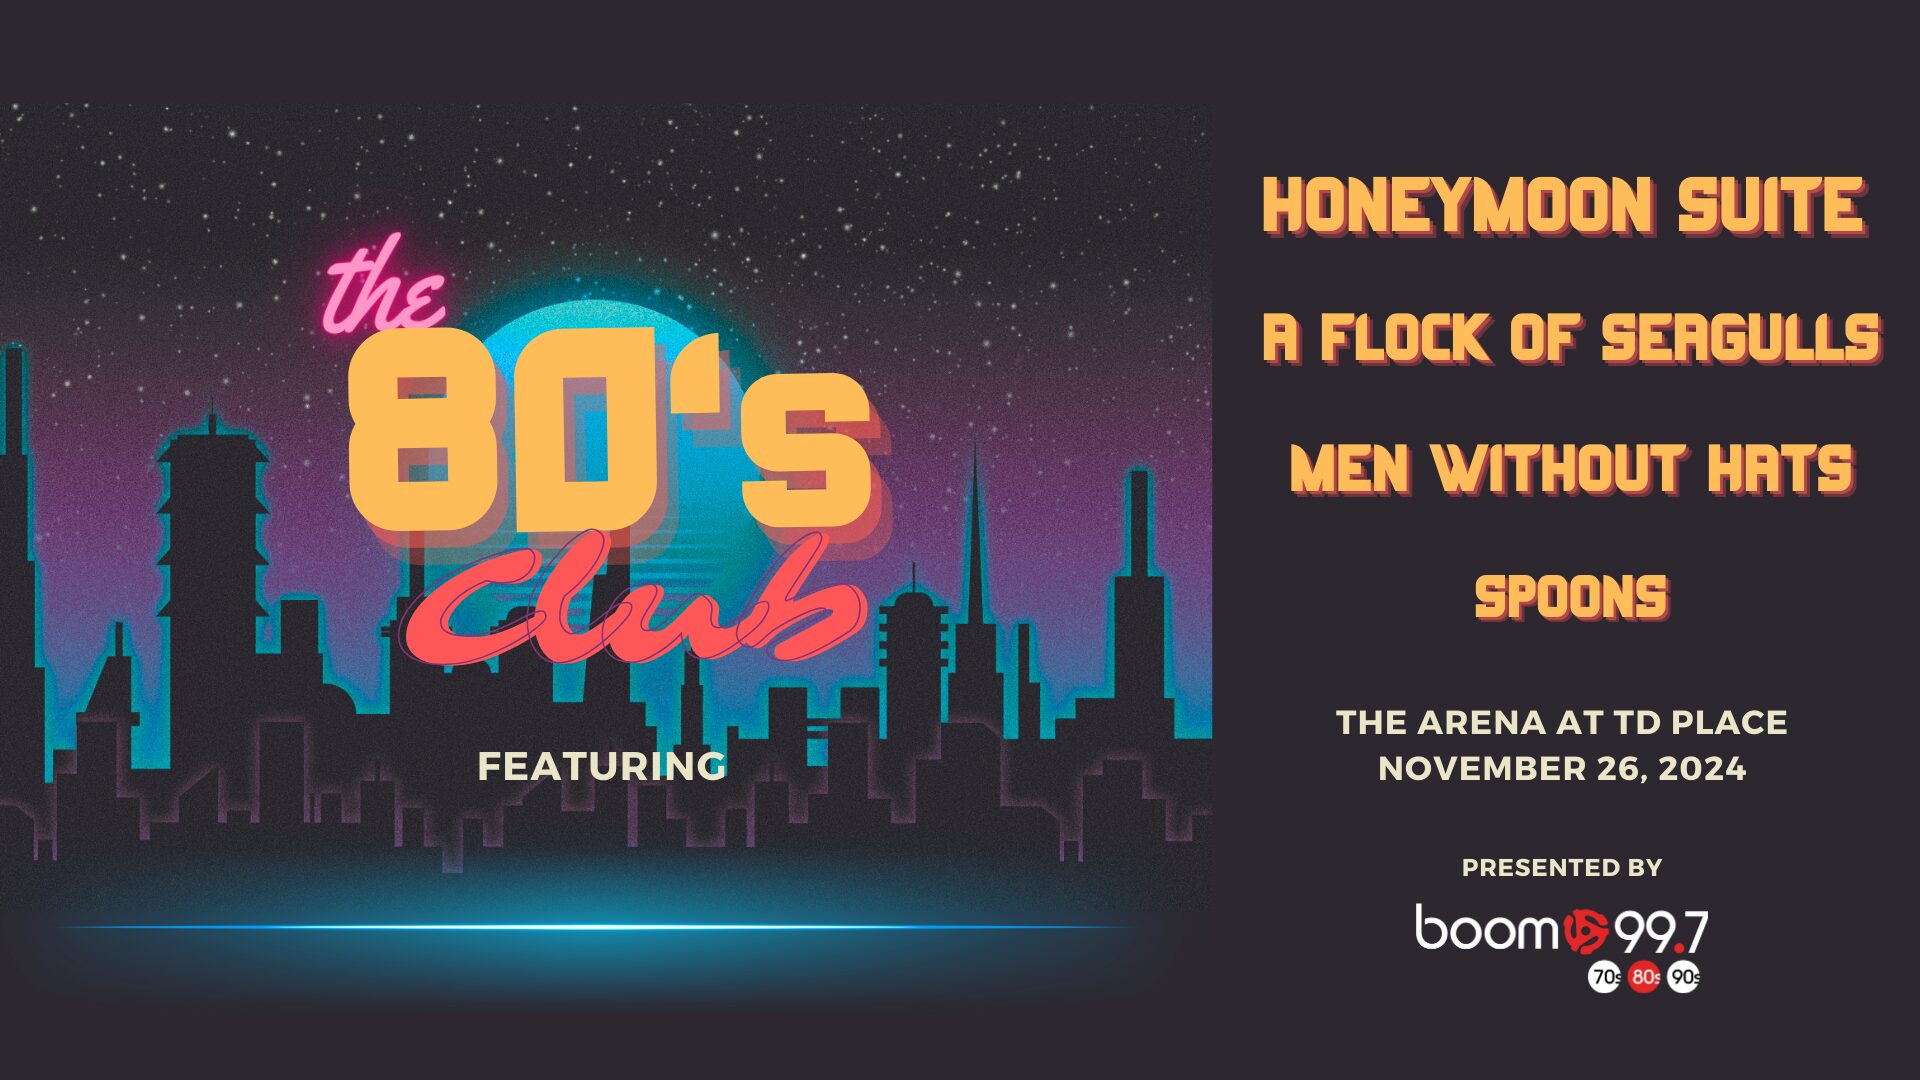 The 80's Club